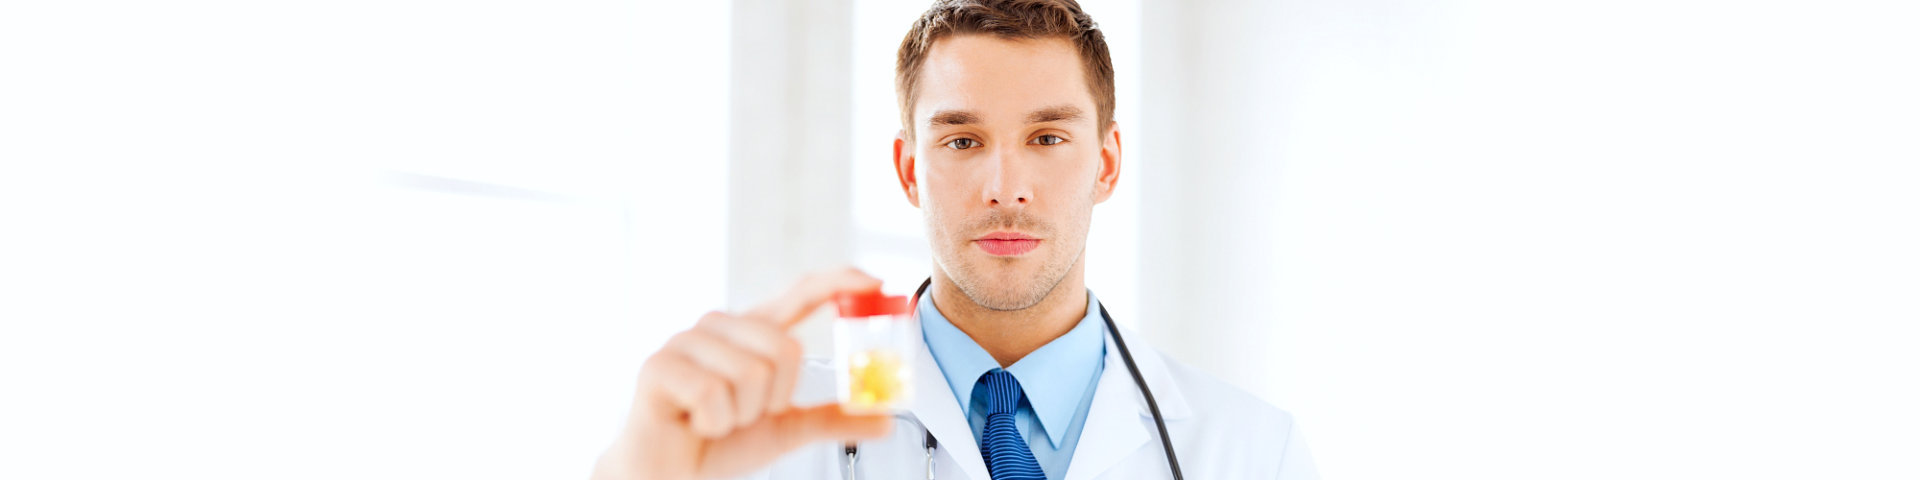 doctor holding a medicine in a container